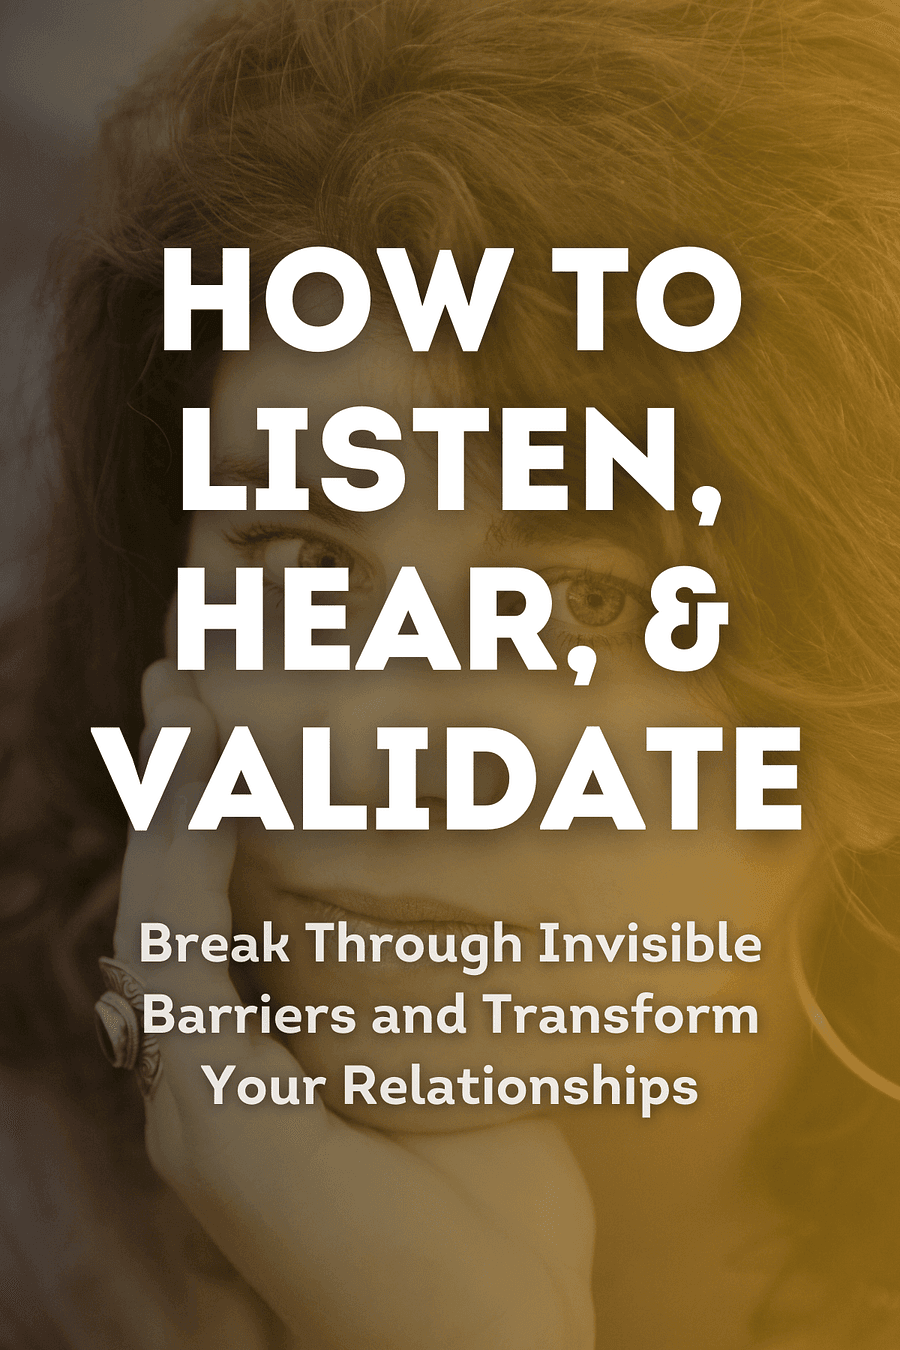 How to Listen, Hear, and Validate by Patrick King - Book Summary